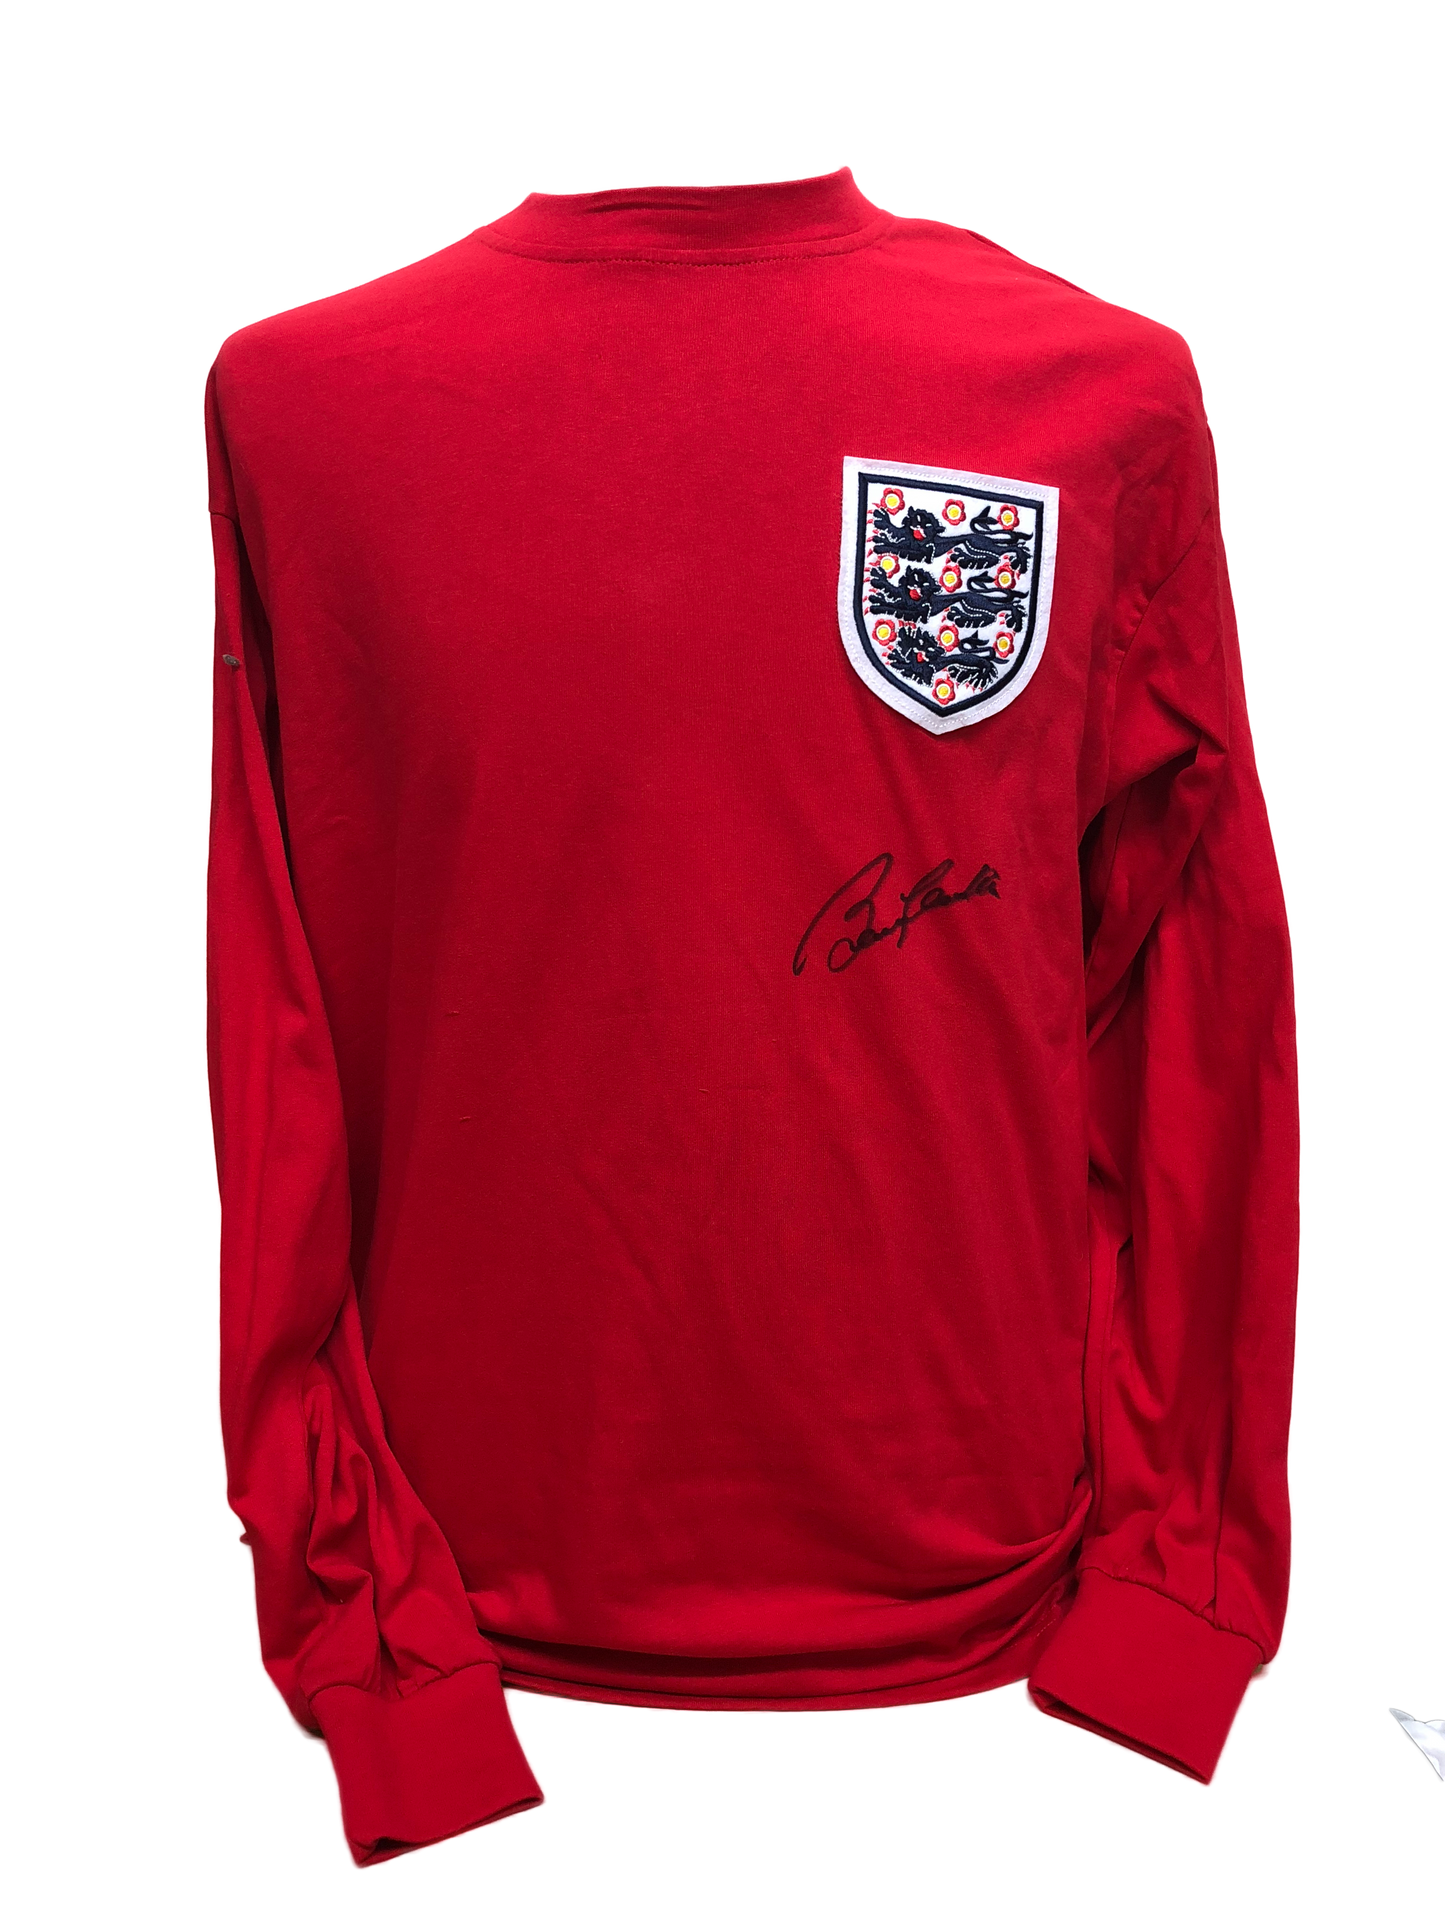 England 1966 final shirt signed by Bobby Charlton